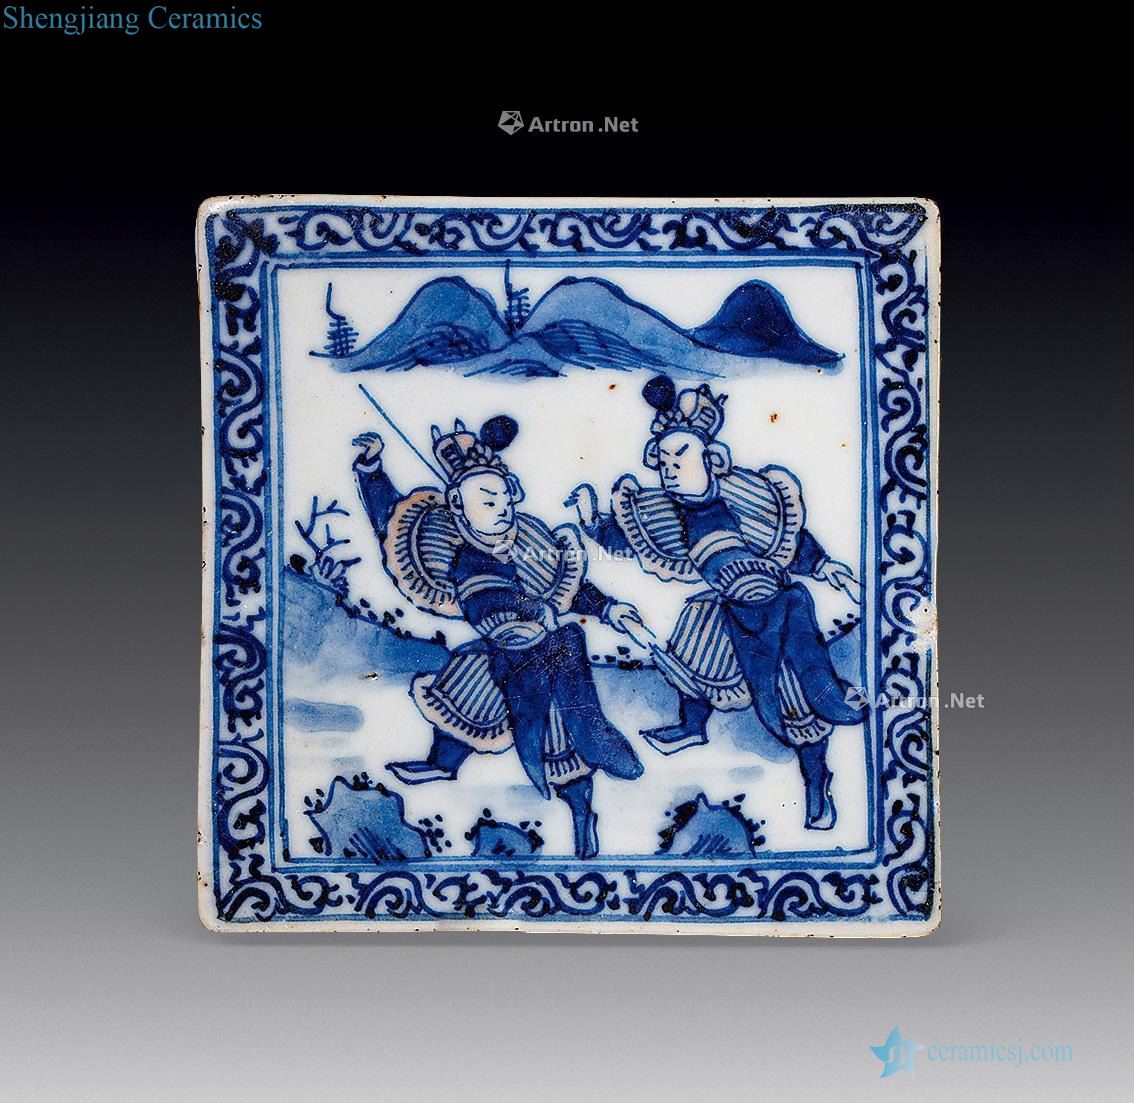 Qing dynasty blue and white ceramic tile